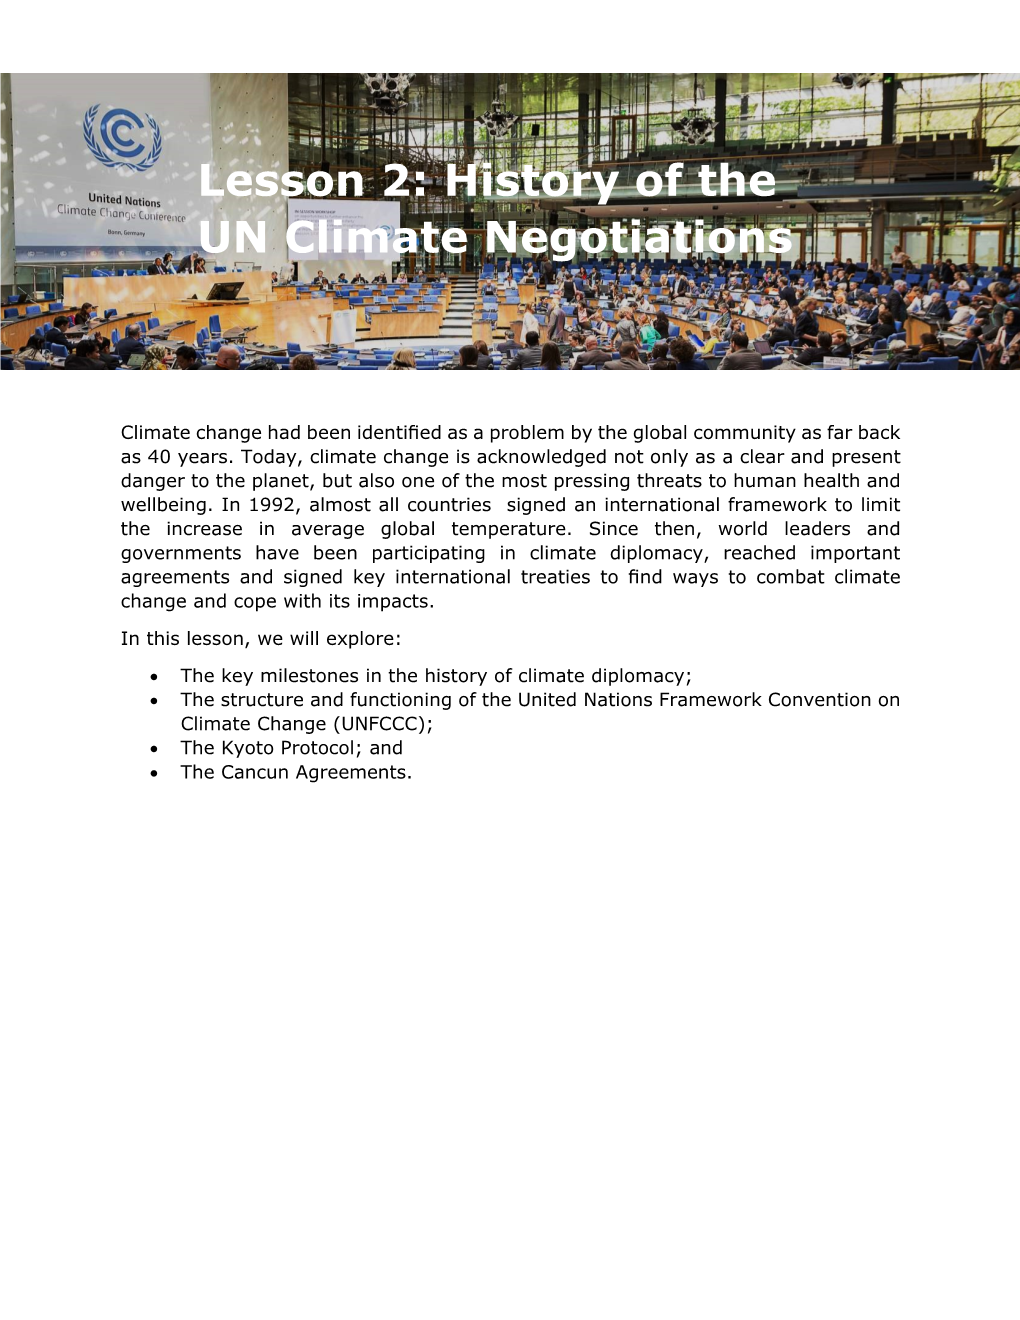 Lesson 2: History of the UN Climate Negotiations